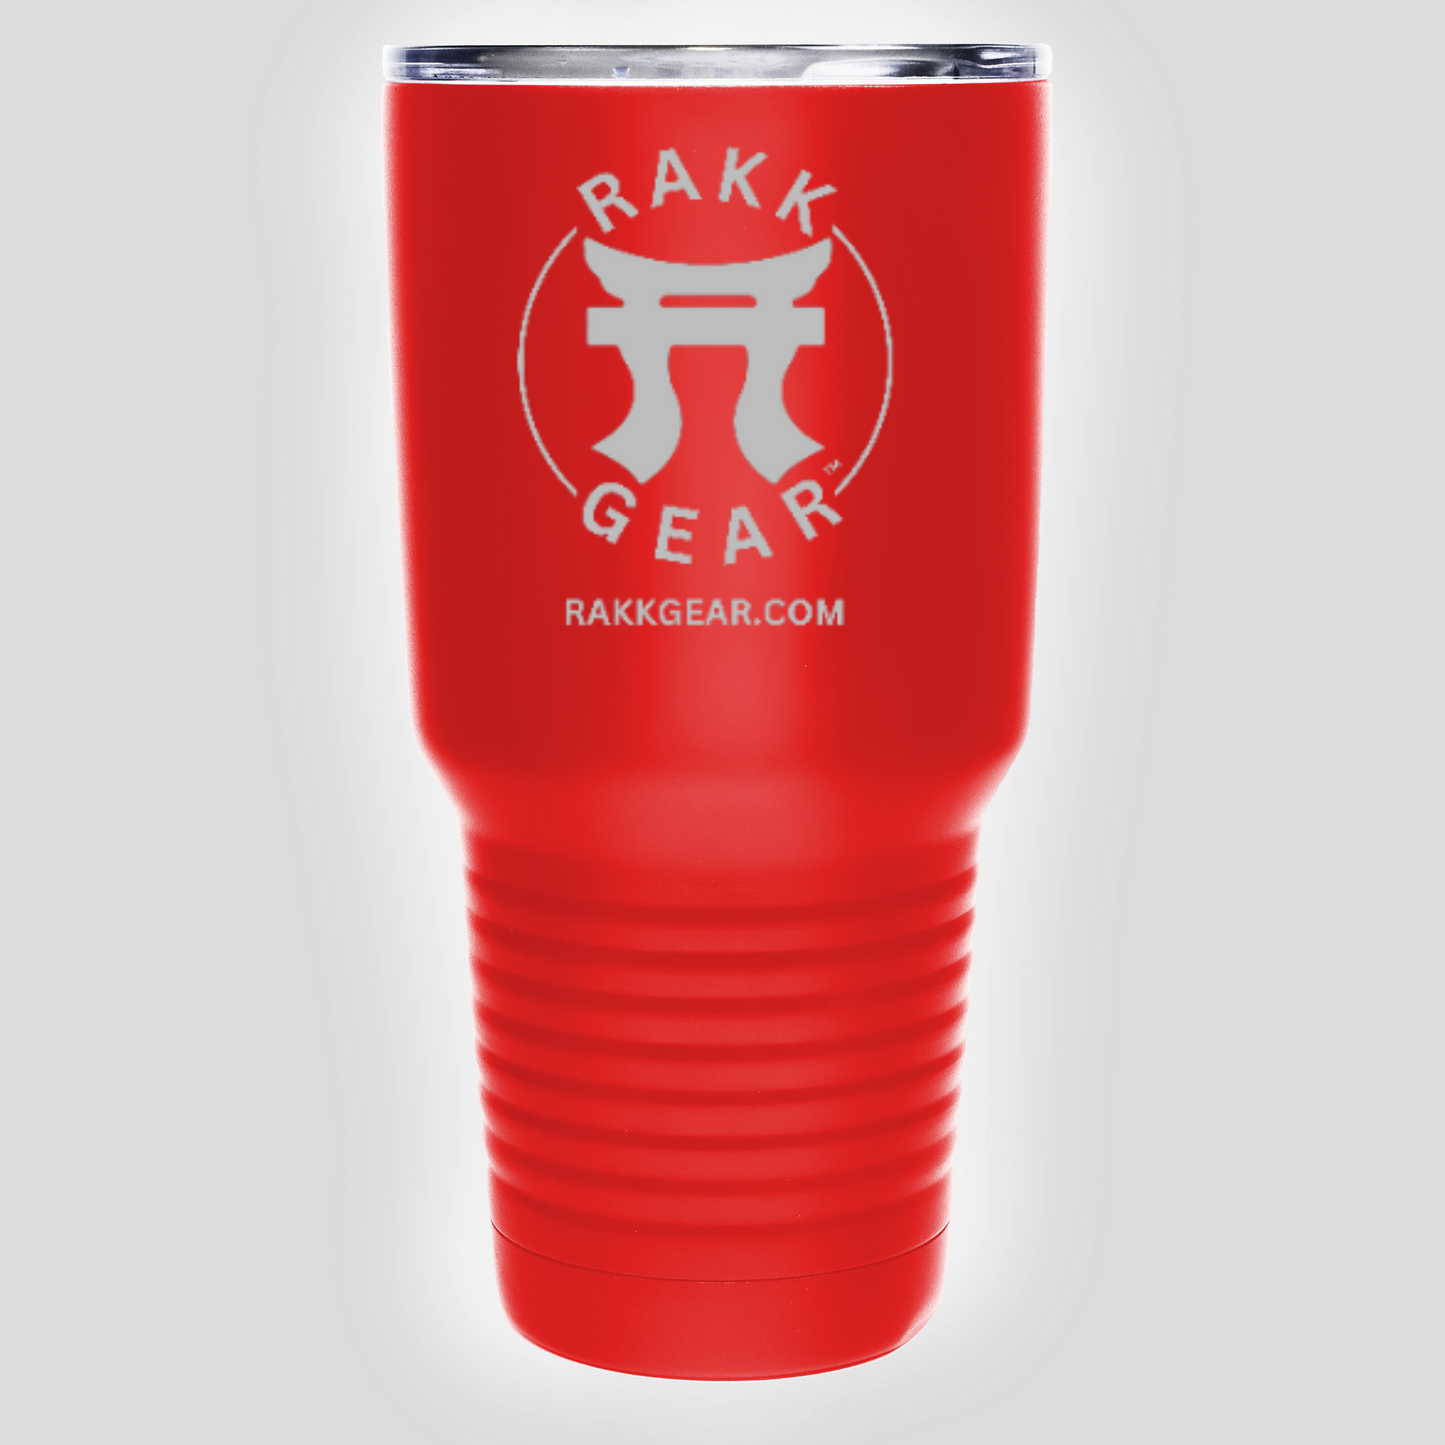 "Red Rakkgear 30oz Stainless Steel Tumbler with Laser Engraved Design."